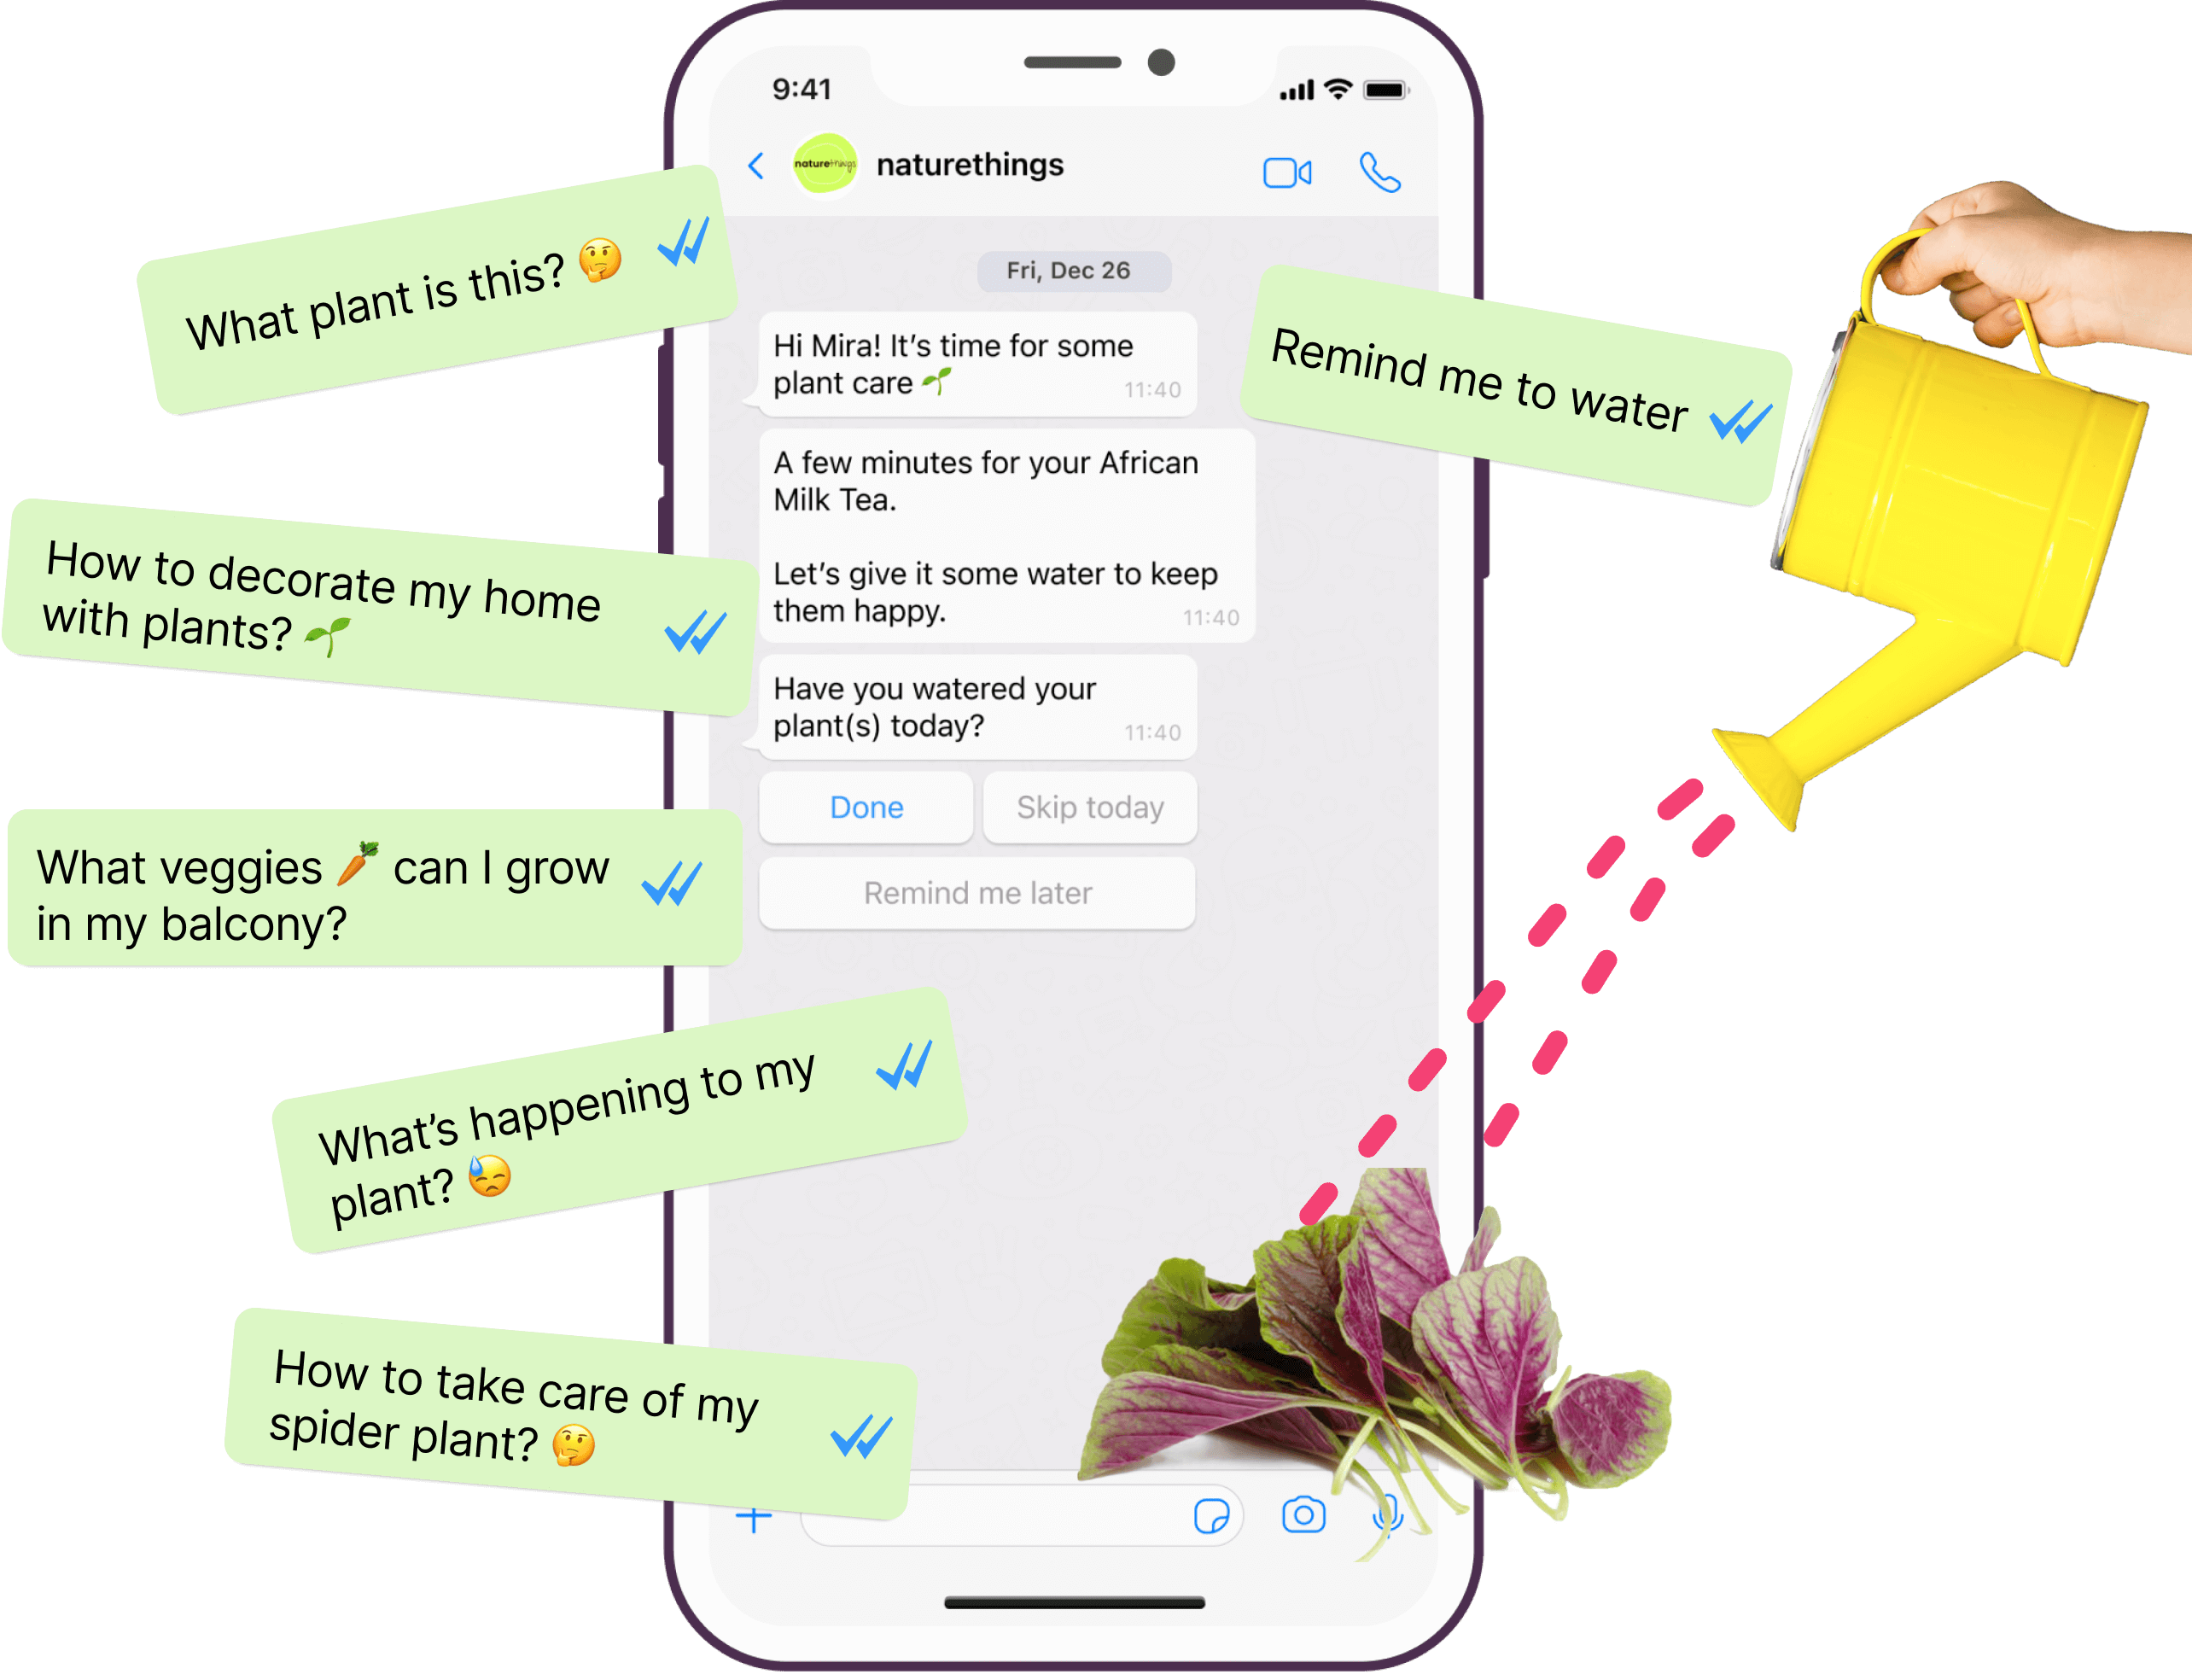 Get help with all your plant questions, timely reminders & expert tips. Discover new plants & ideas. Delivered via WhatsApp.